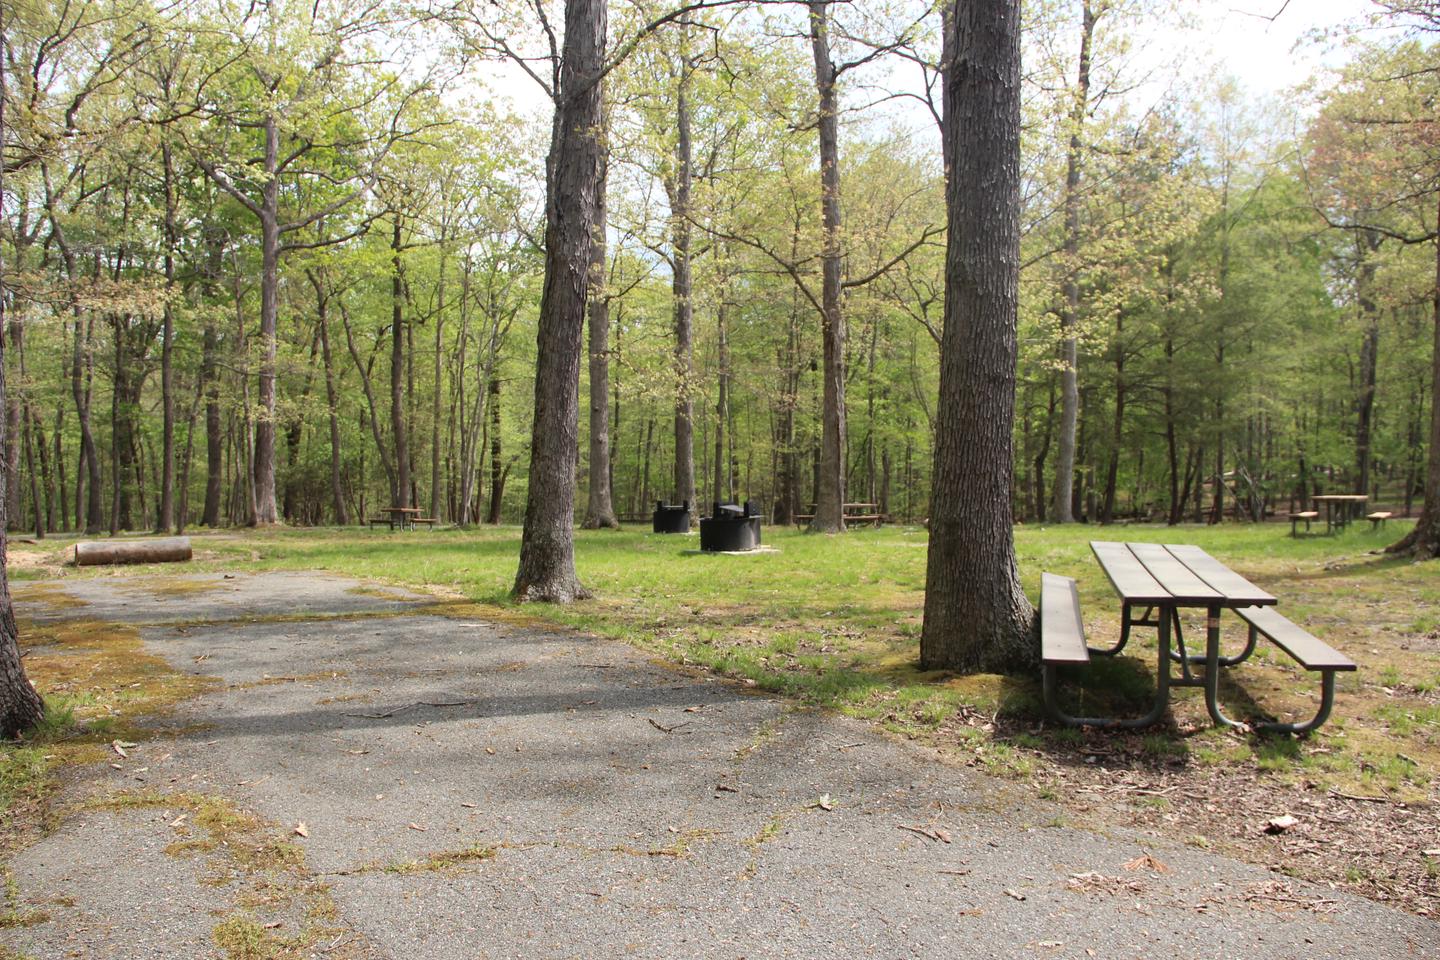 C104 C Loop of the Greenbelt Park Md campgroundC104 C Loop of the Greenbelt Park Maryland campground (former Site 107)